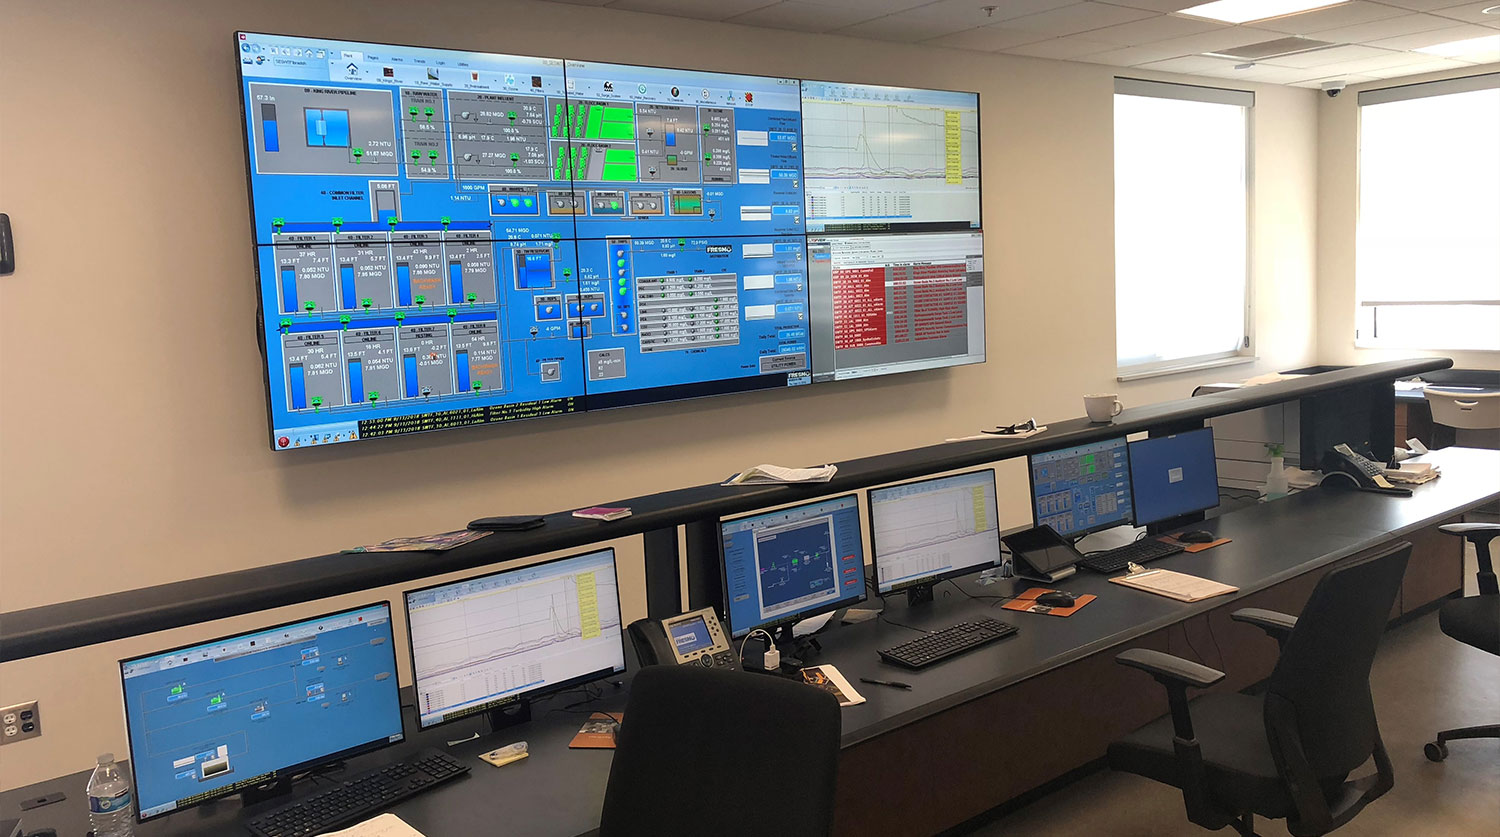 SCADA room with desks and several monitors